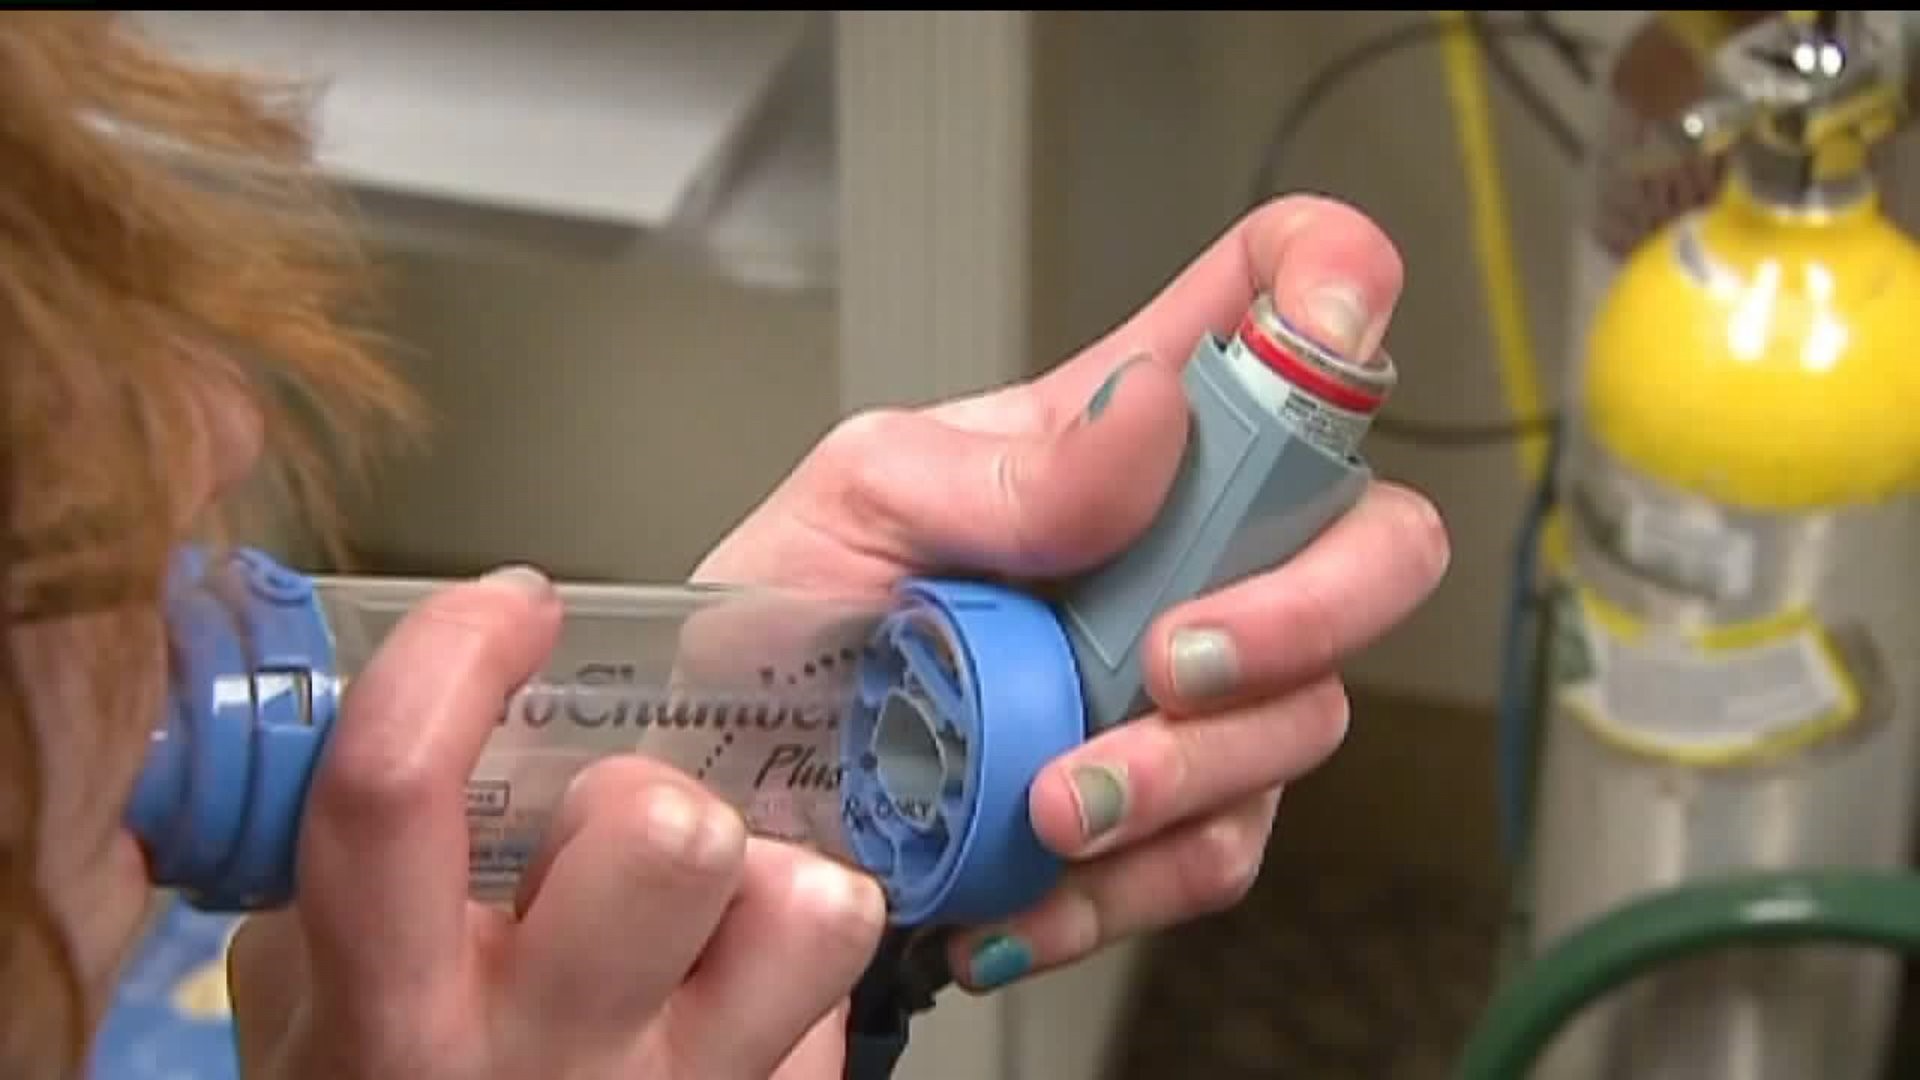 Exercise-induced asthma can go undiagnosed in children